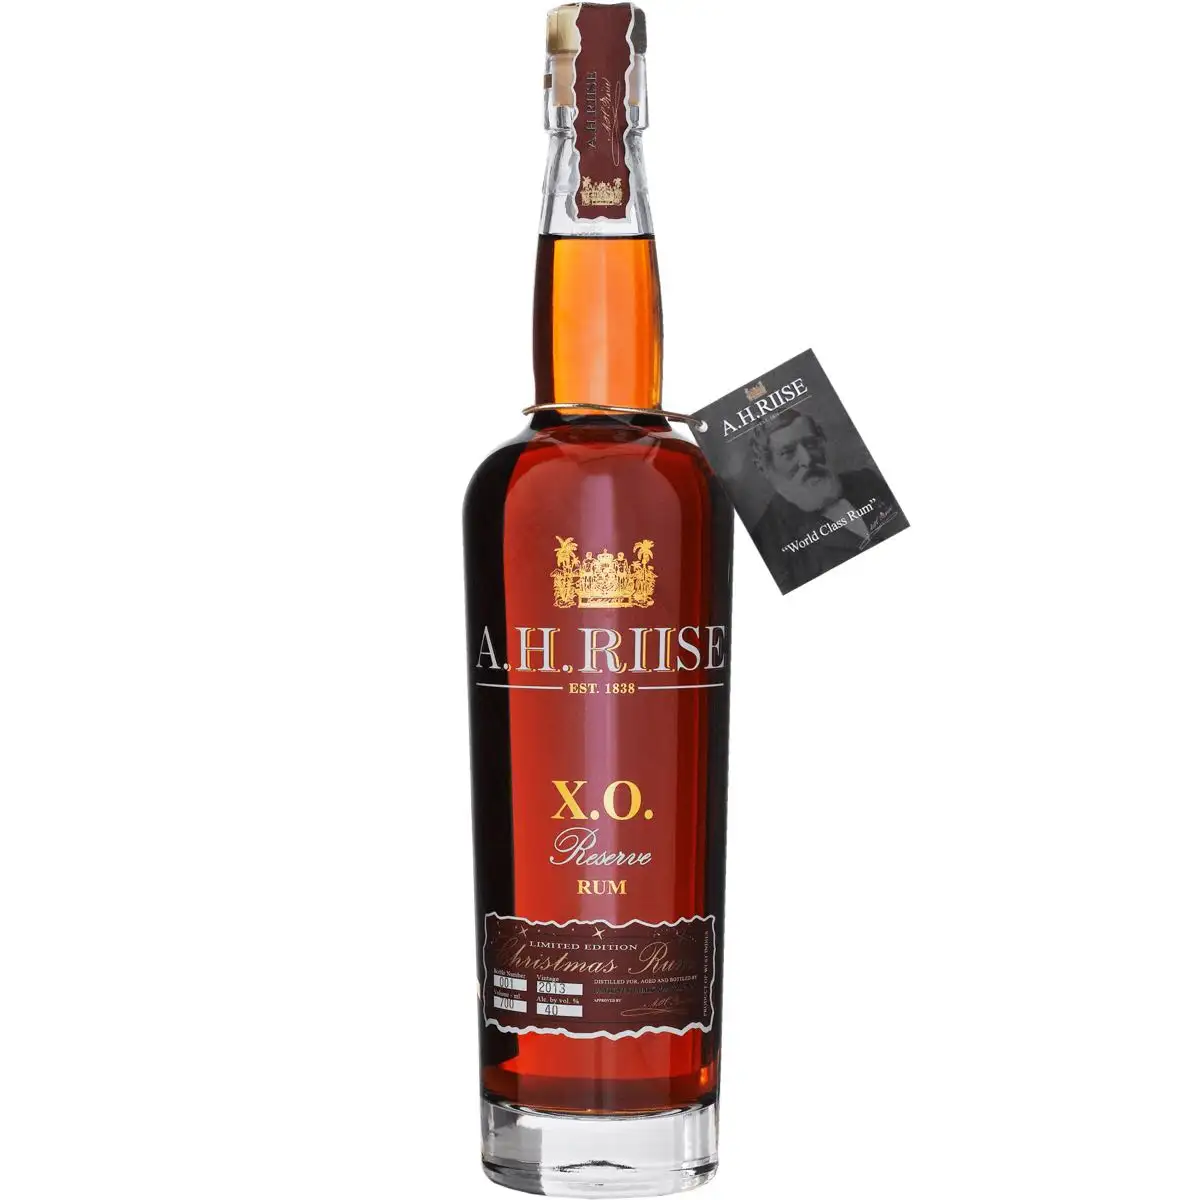 Image of the front of the bottle of the rum XO Reserve Christmas Rum